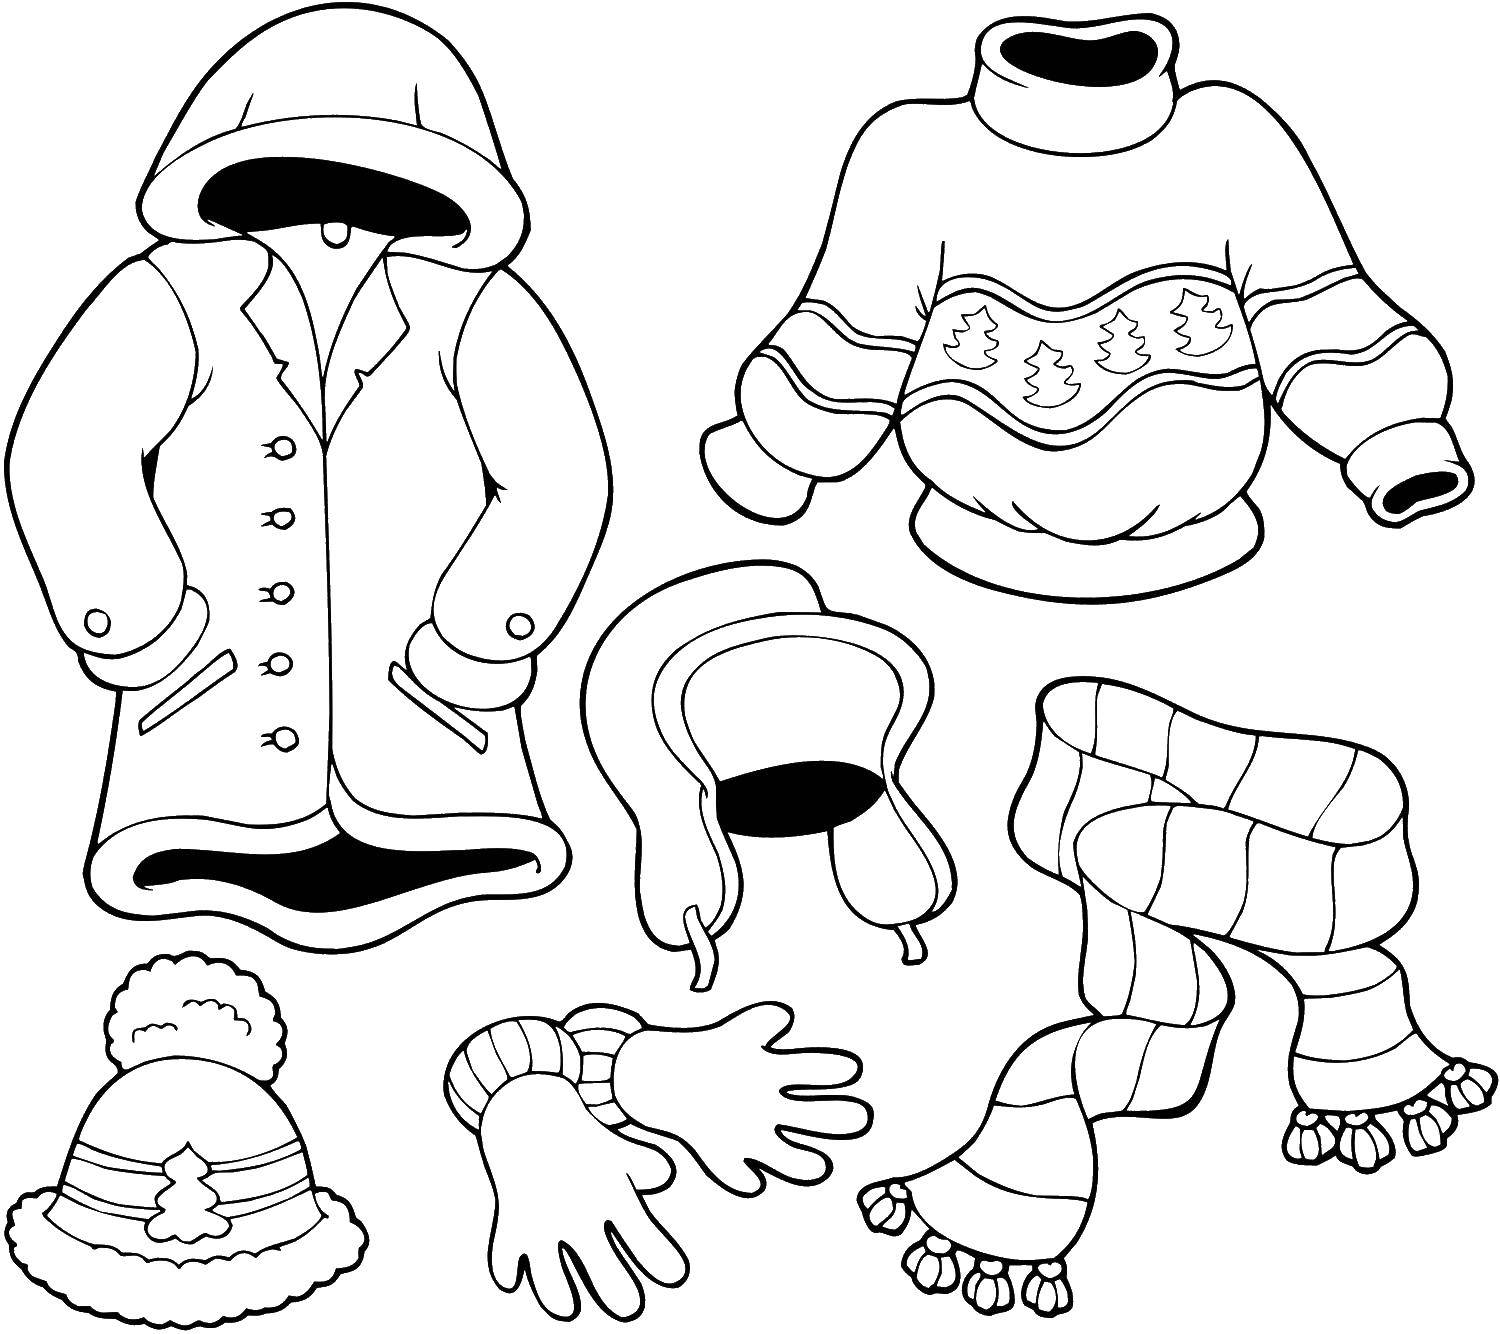 Coloring Clothing set for winter. Category clothing. Tags:  Clothing, hat, cap, scarf, gloves, sweater, coat.